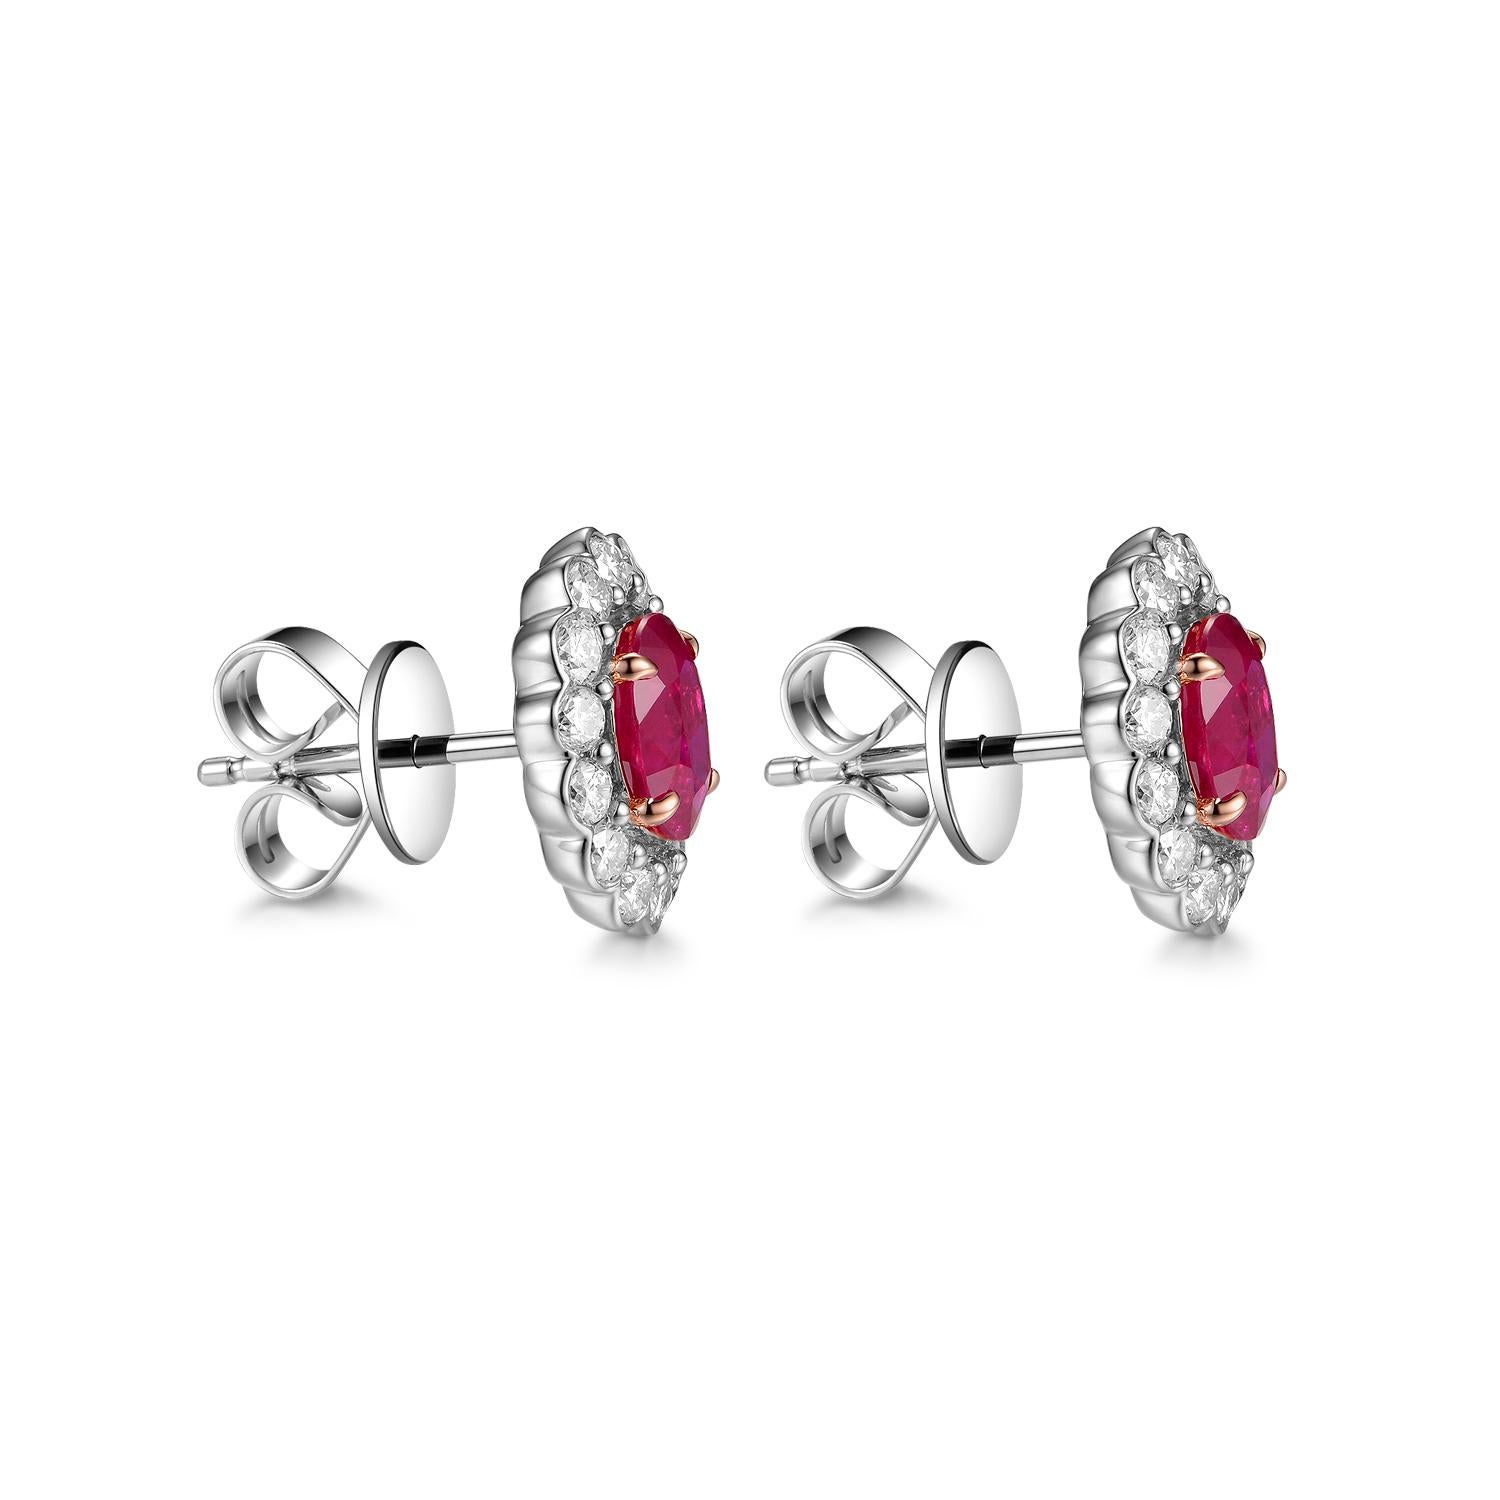 This dainty earring features 1.53 carats of oval shape ruby (0.765 carat each side), assented with 0.63 carat of diamond halo. This earring is set in 18 karat white gold, the prongs are made with 18 karat rose gold. Truly a special gift for that